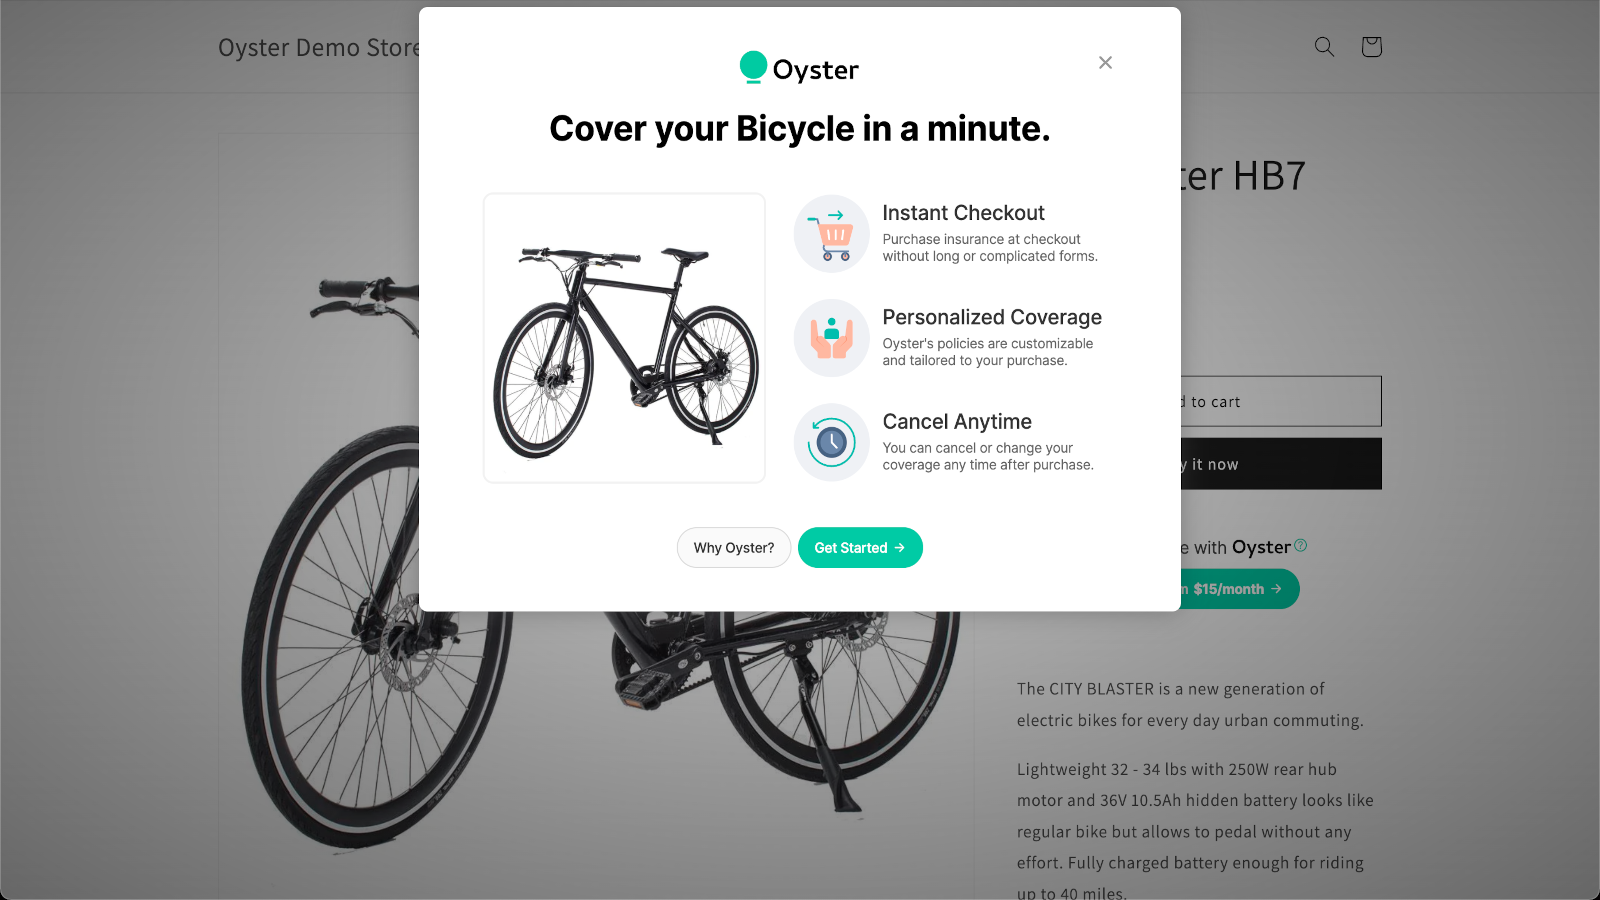 The widget popup educates customers about insurance and Oyster.